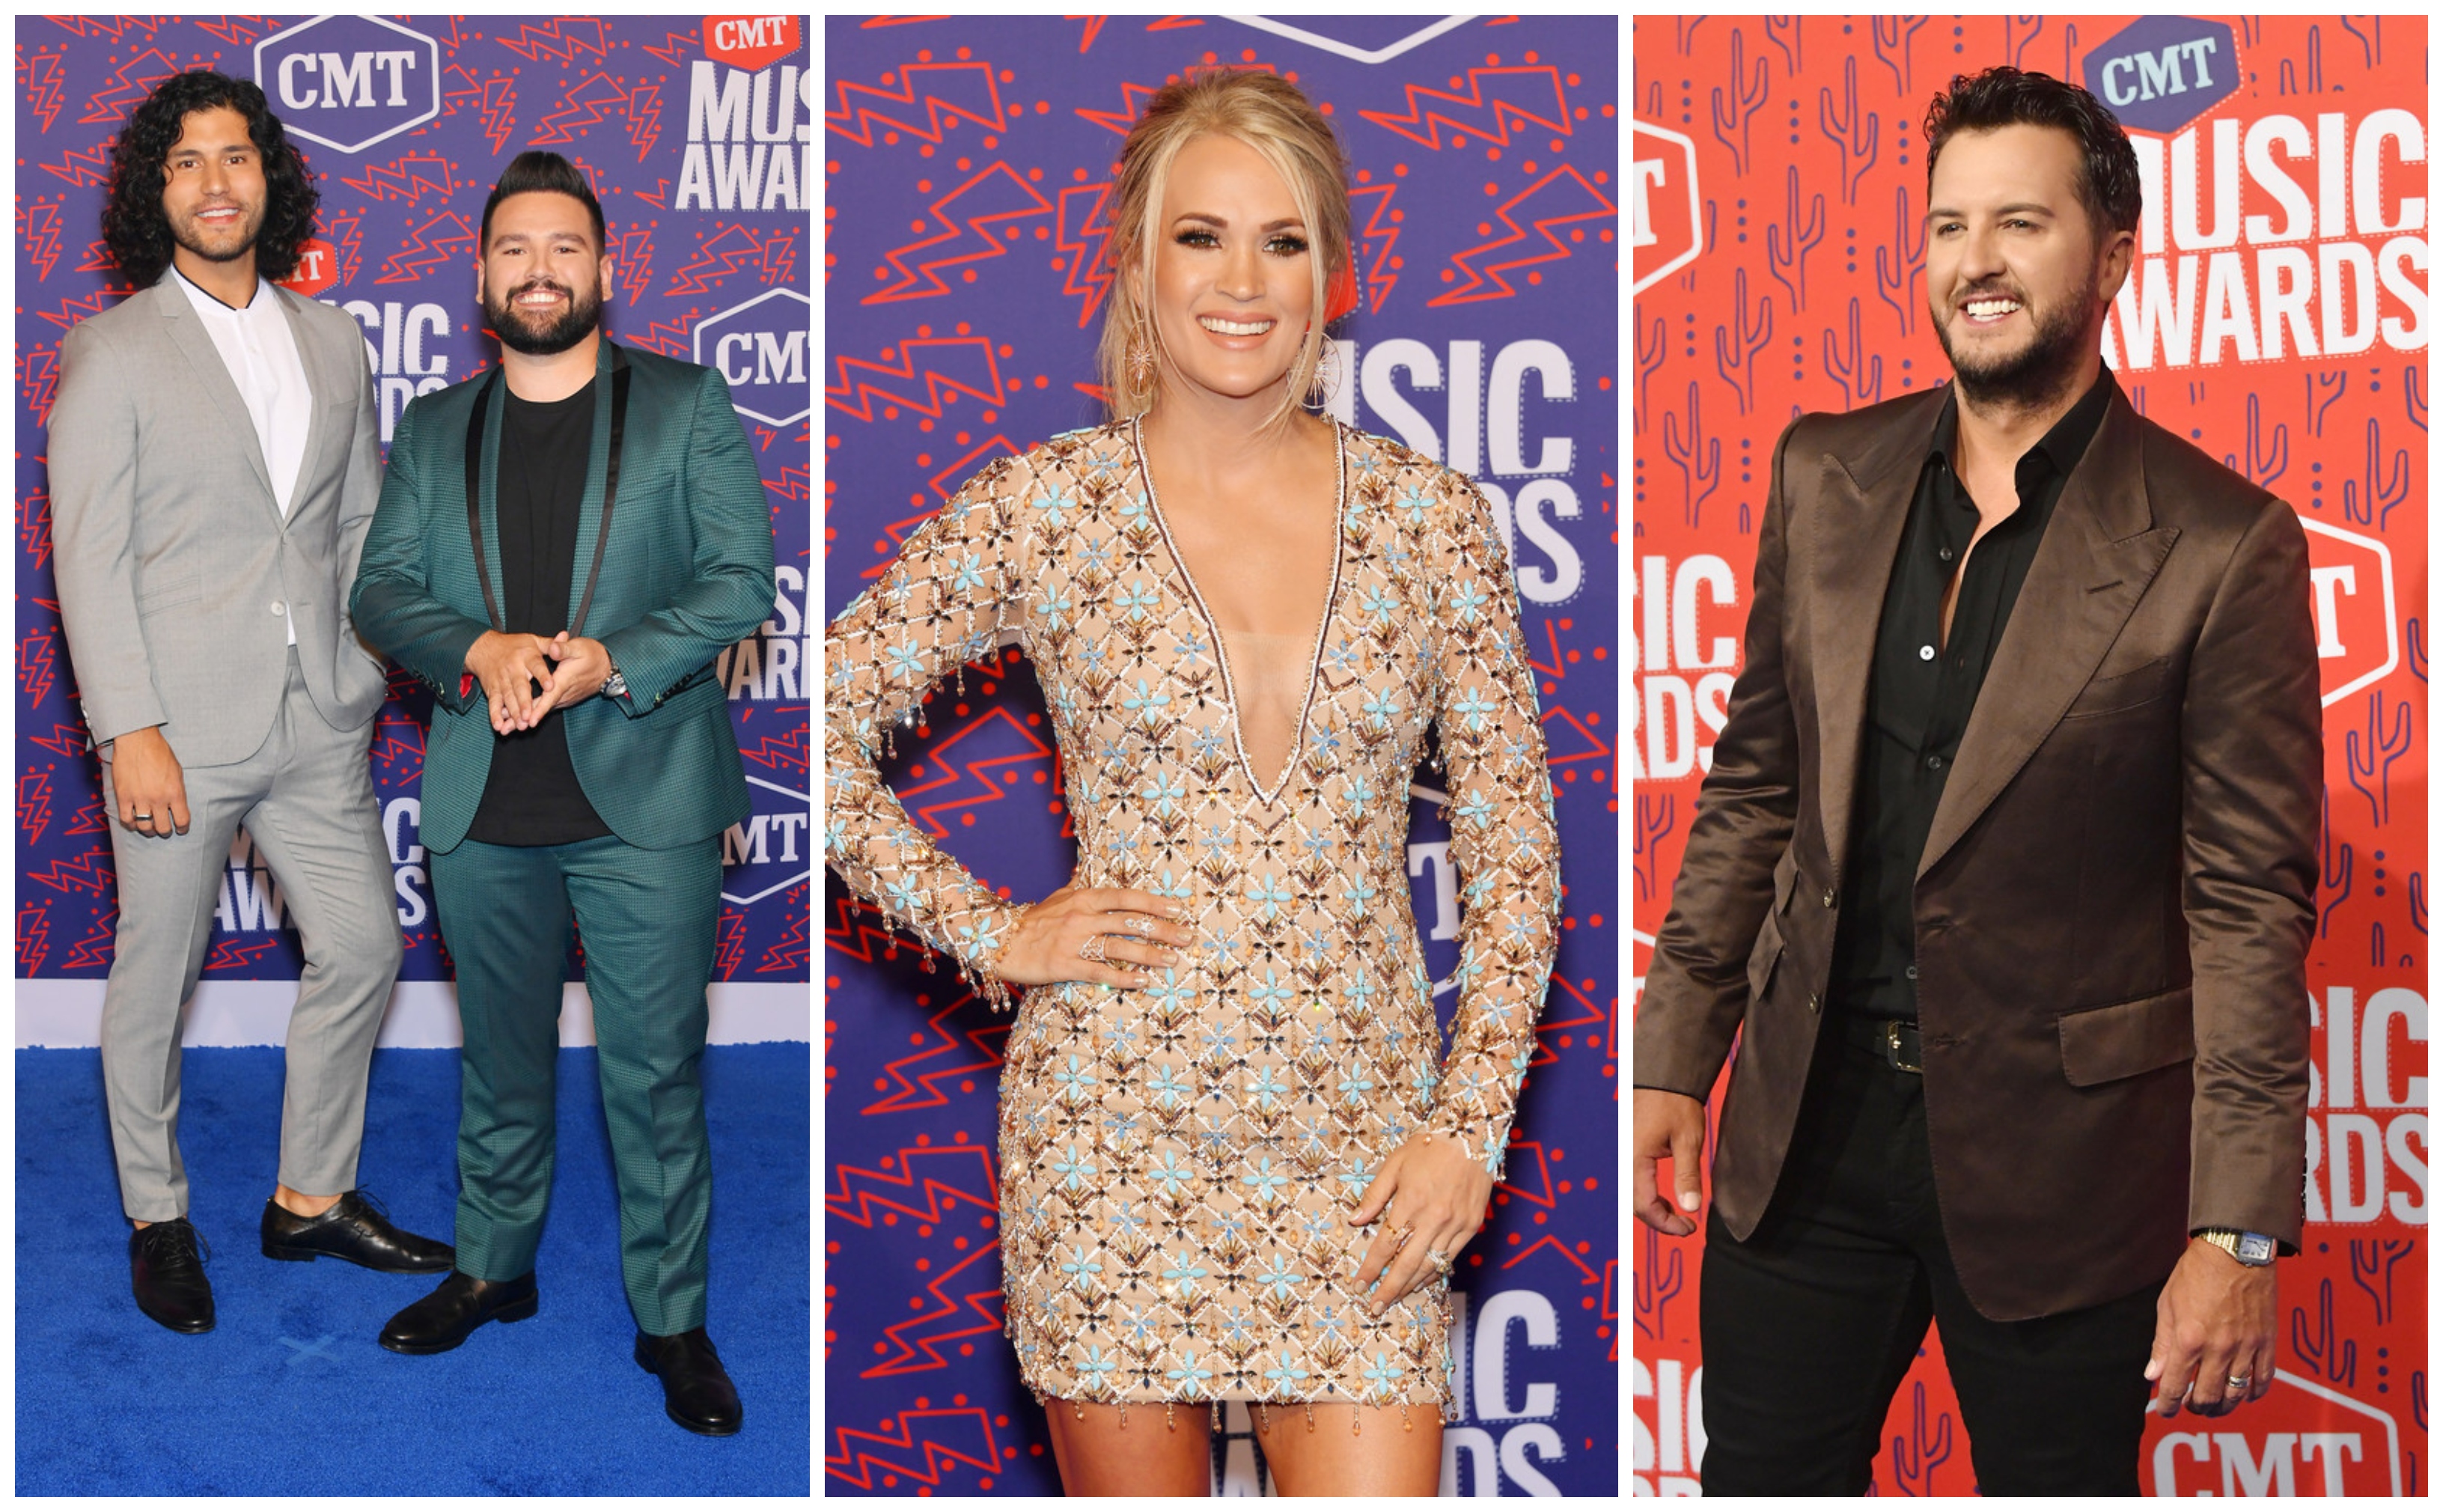 Dan + Shay, Carrie Underwood, Luke Bryan + More Step Out for the 2019 CMT Music Awards – Red Carpet Arrivals